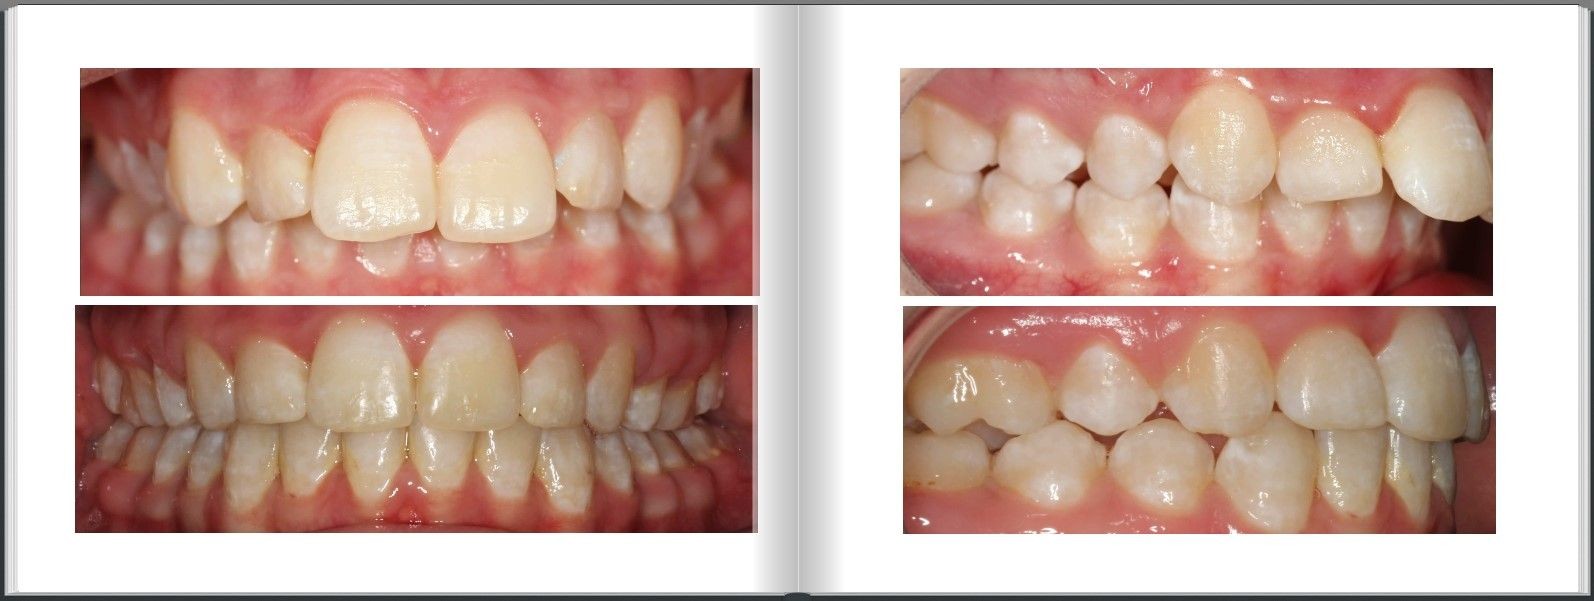 Overbite braces correction with extractions